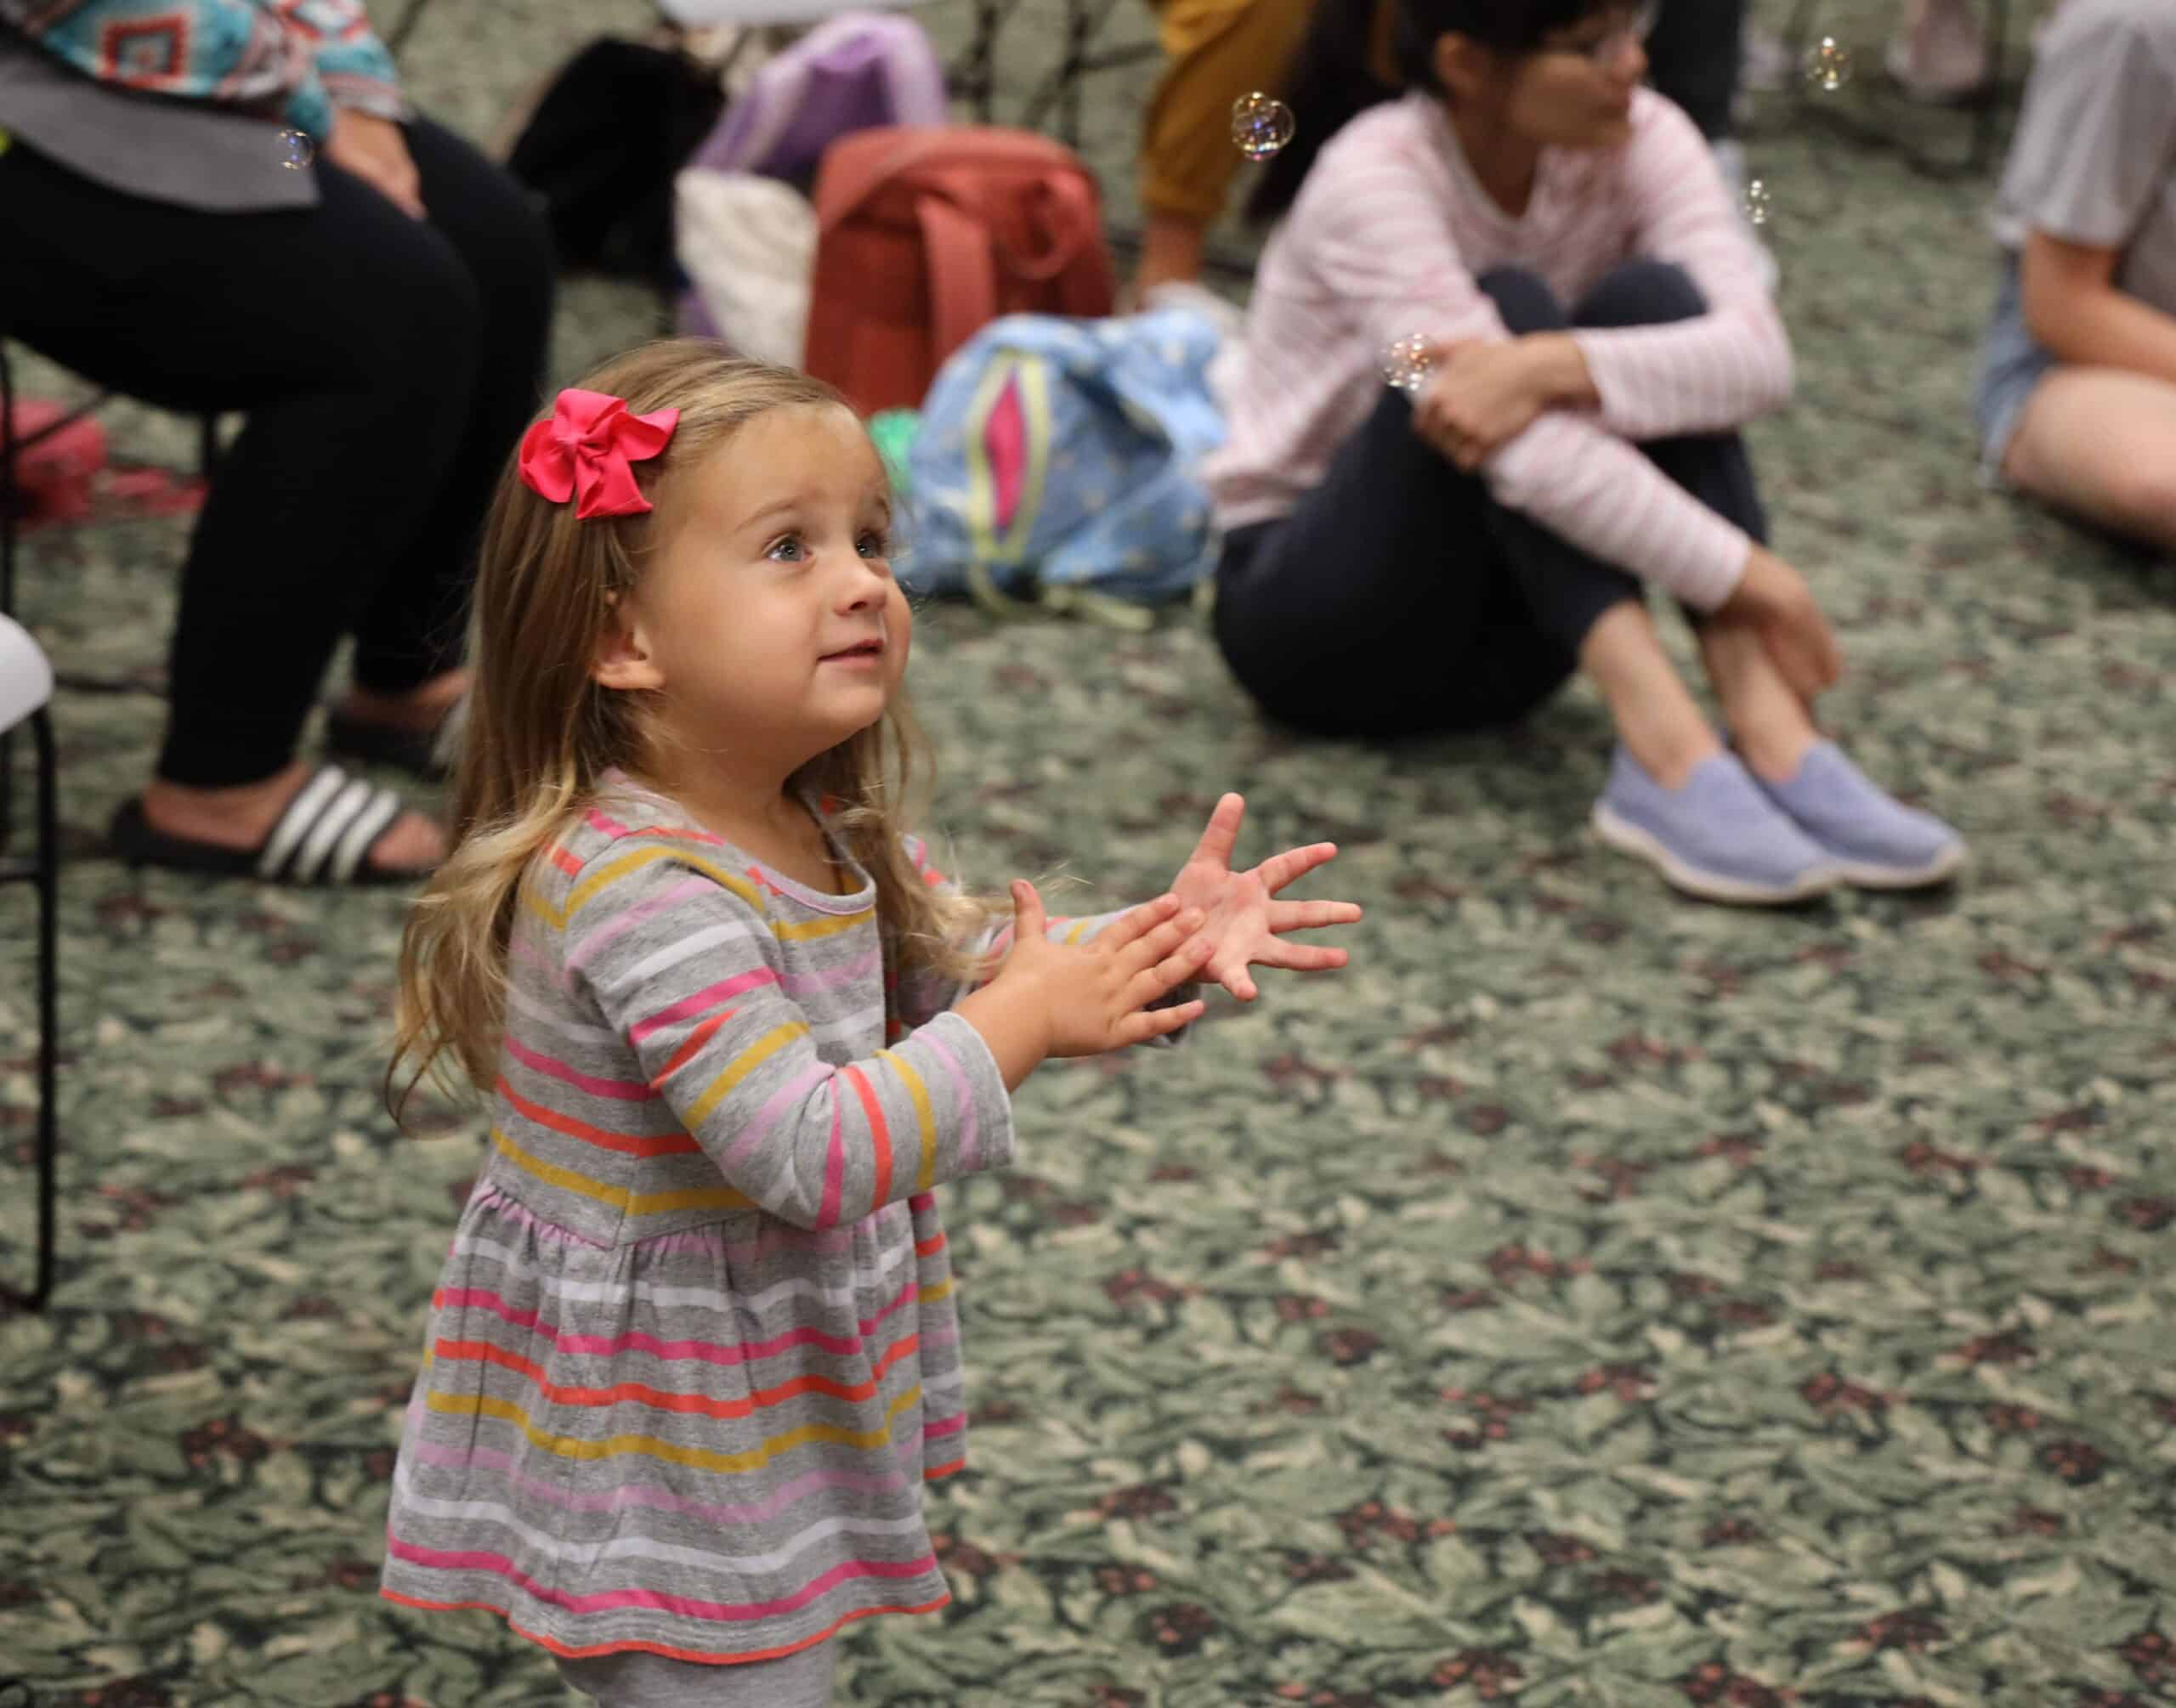 Child clapping